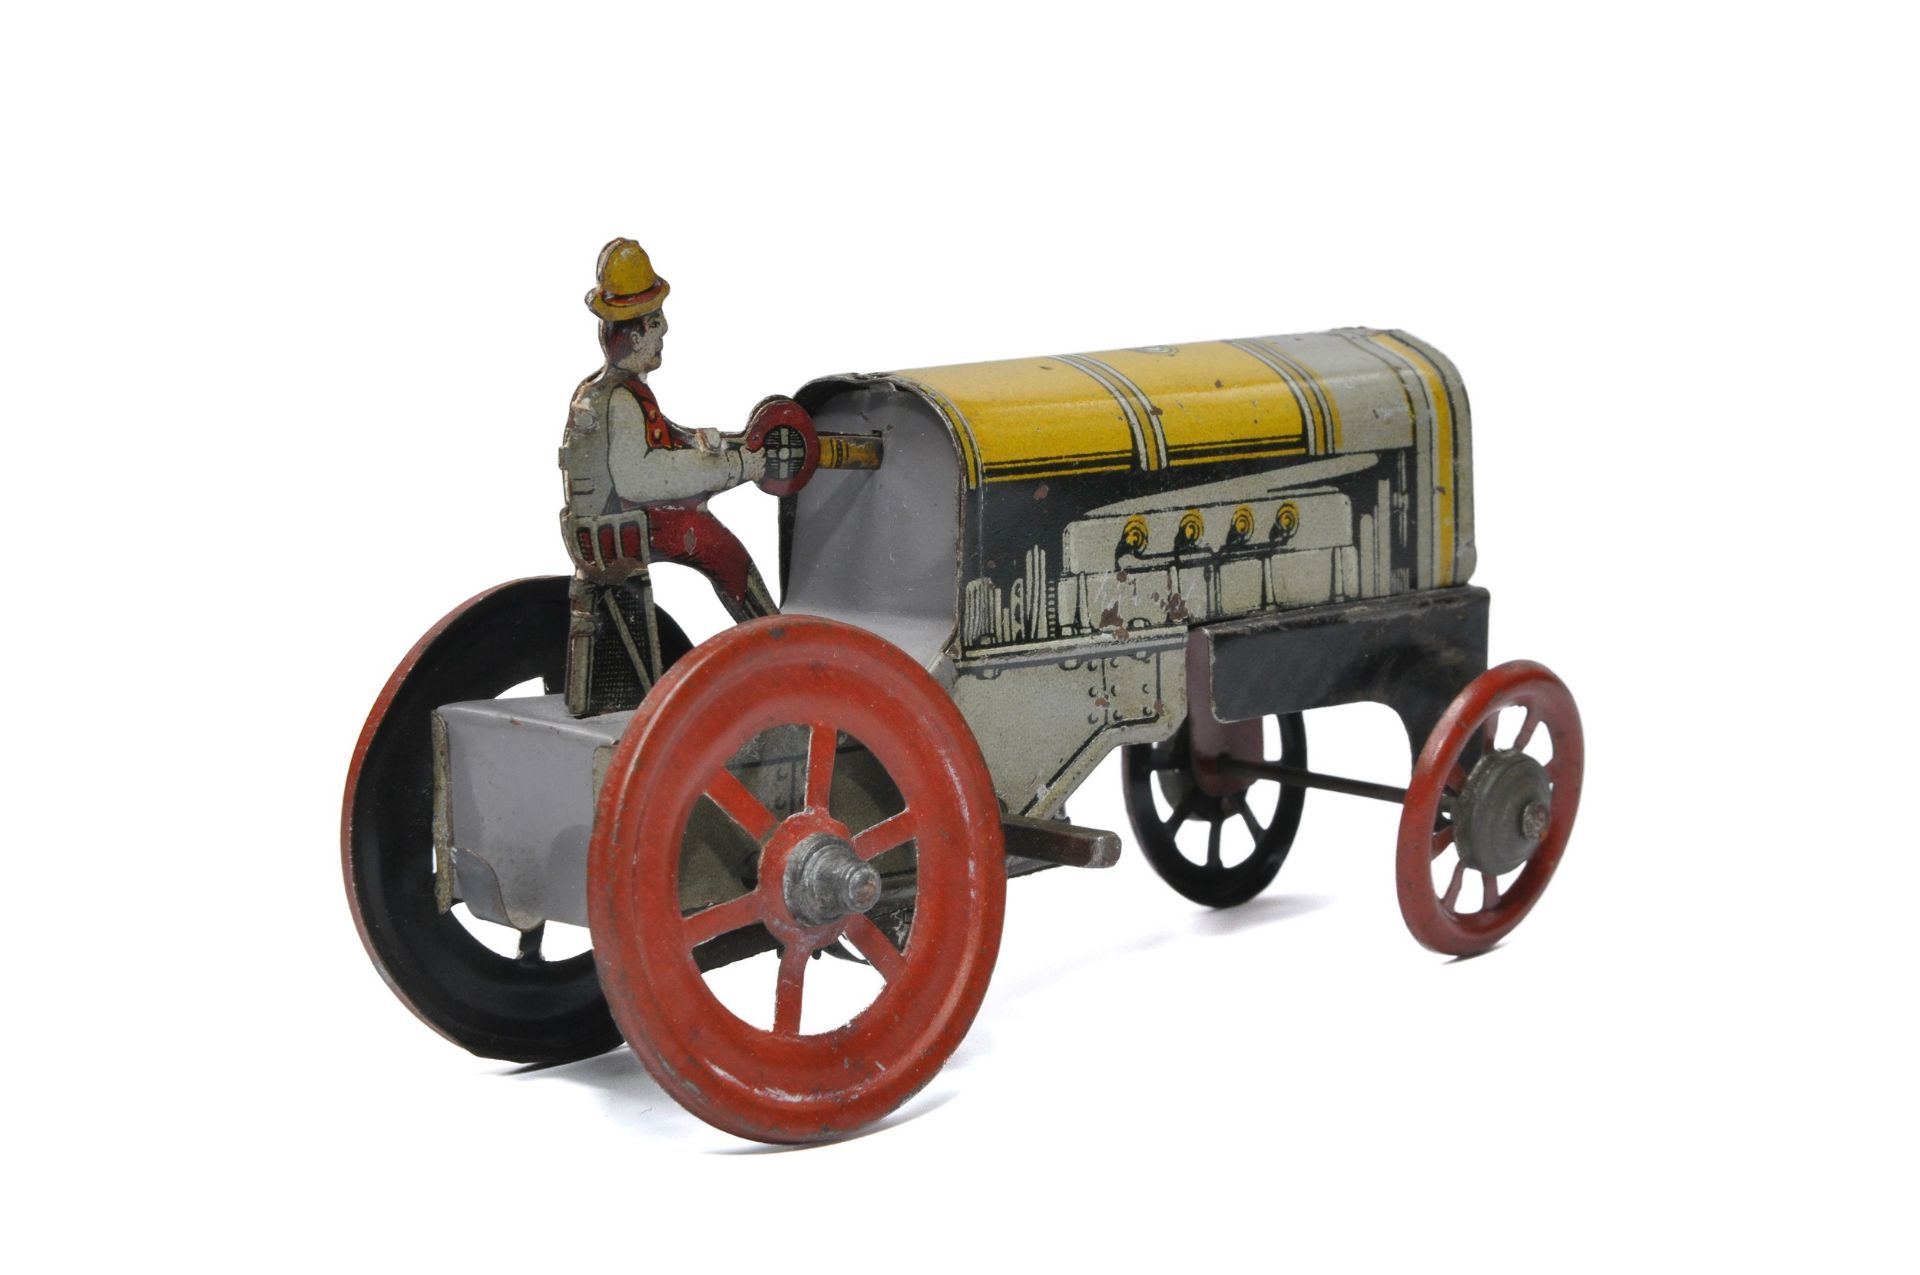 Distler Penny Toy German Mechanical Tractor with driver. In working order. Displays good with some - Image 3 of 3